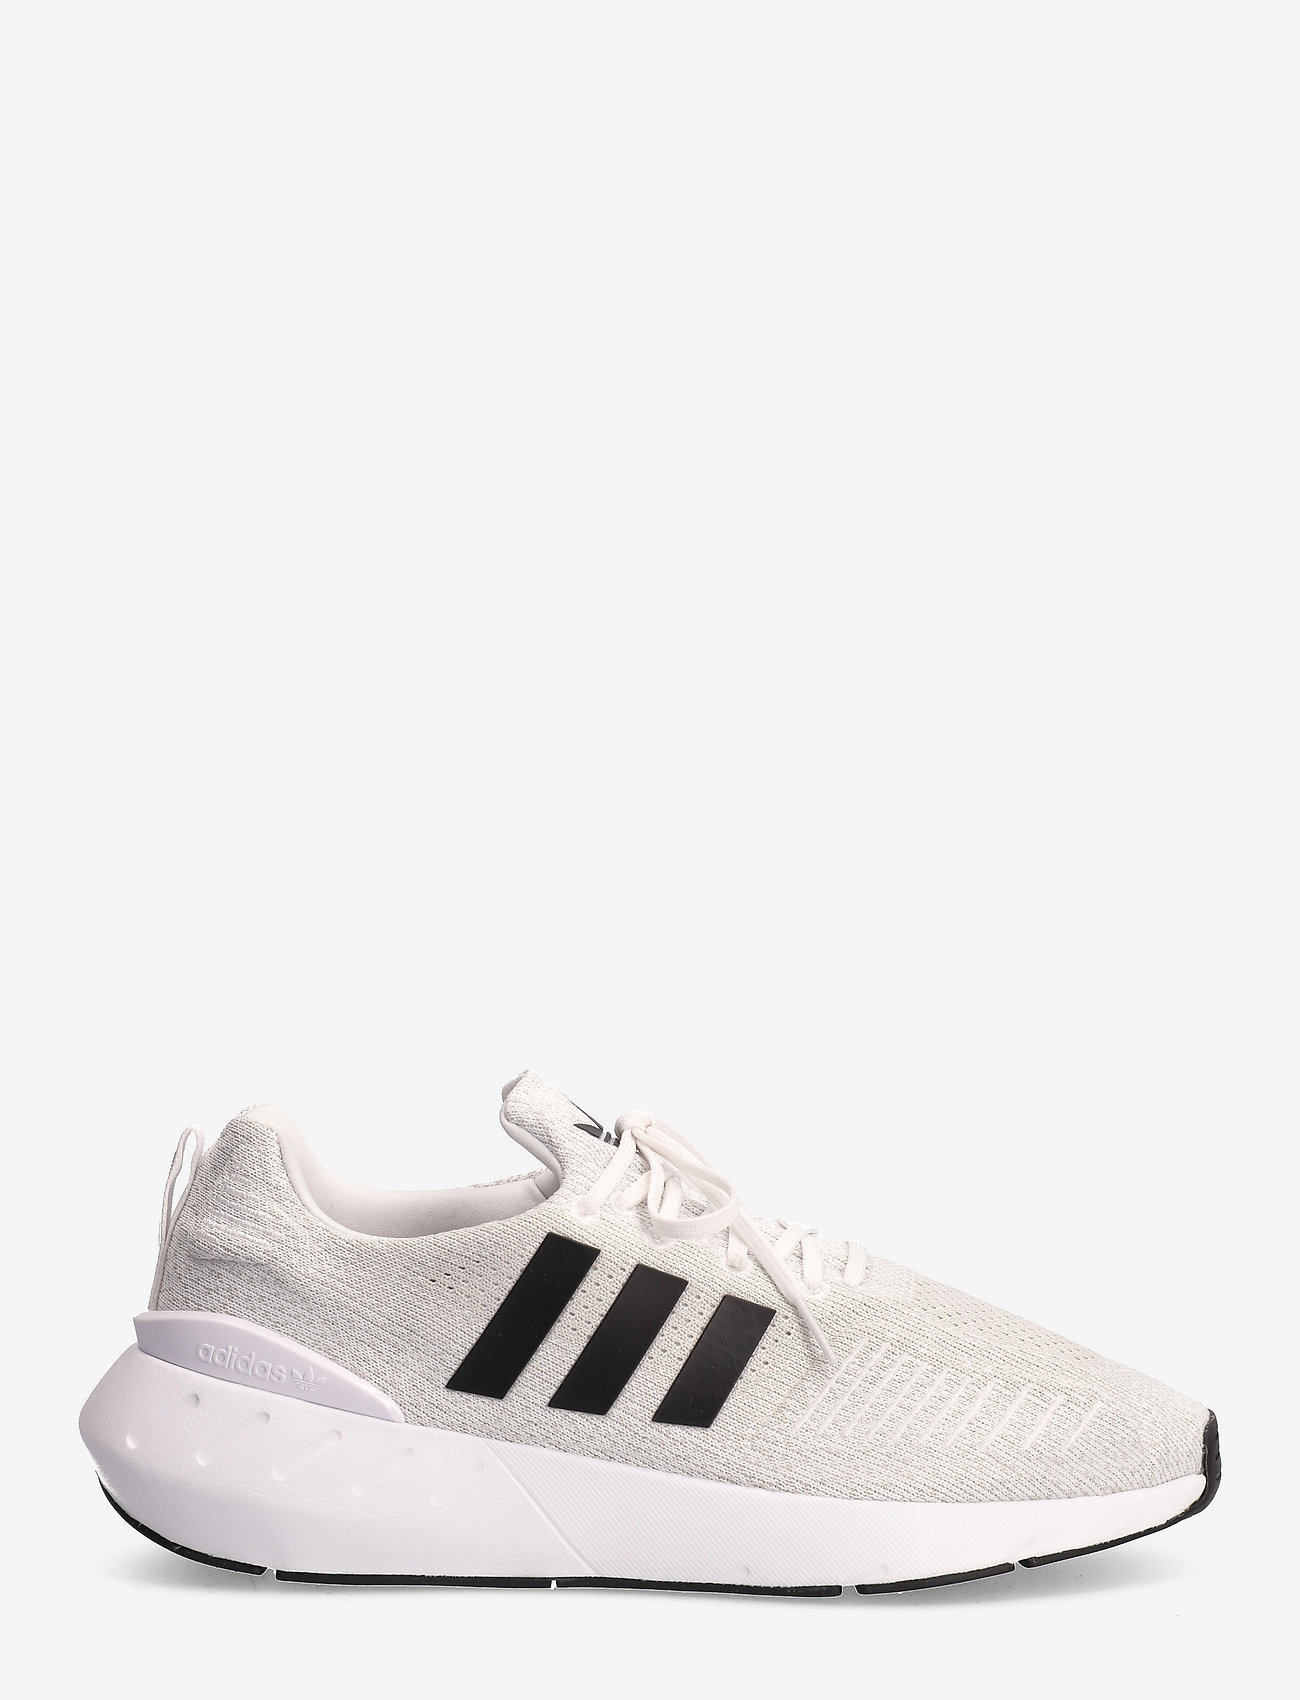 adidas Originals - Swift Run 22 Shoes - low top sneakers - ftwwht/cblack/greone - 1